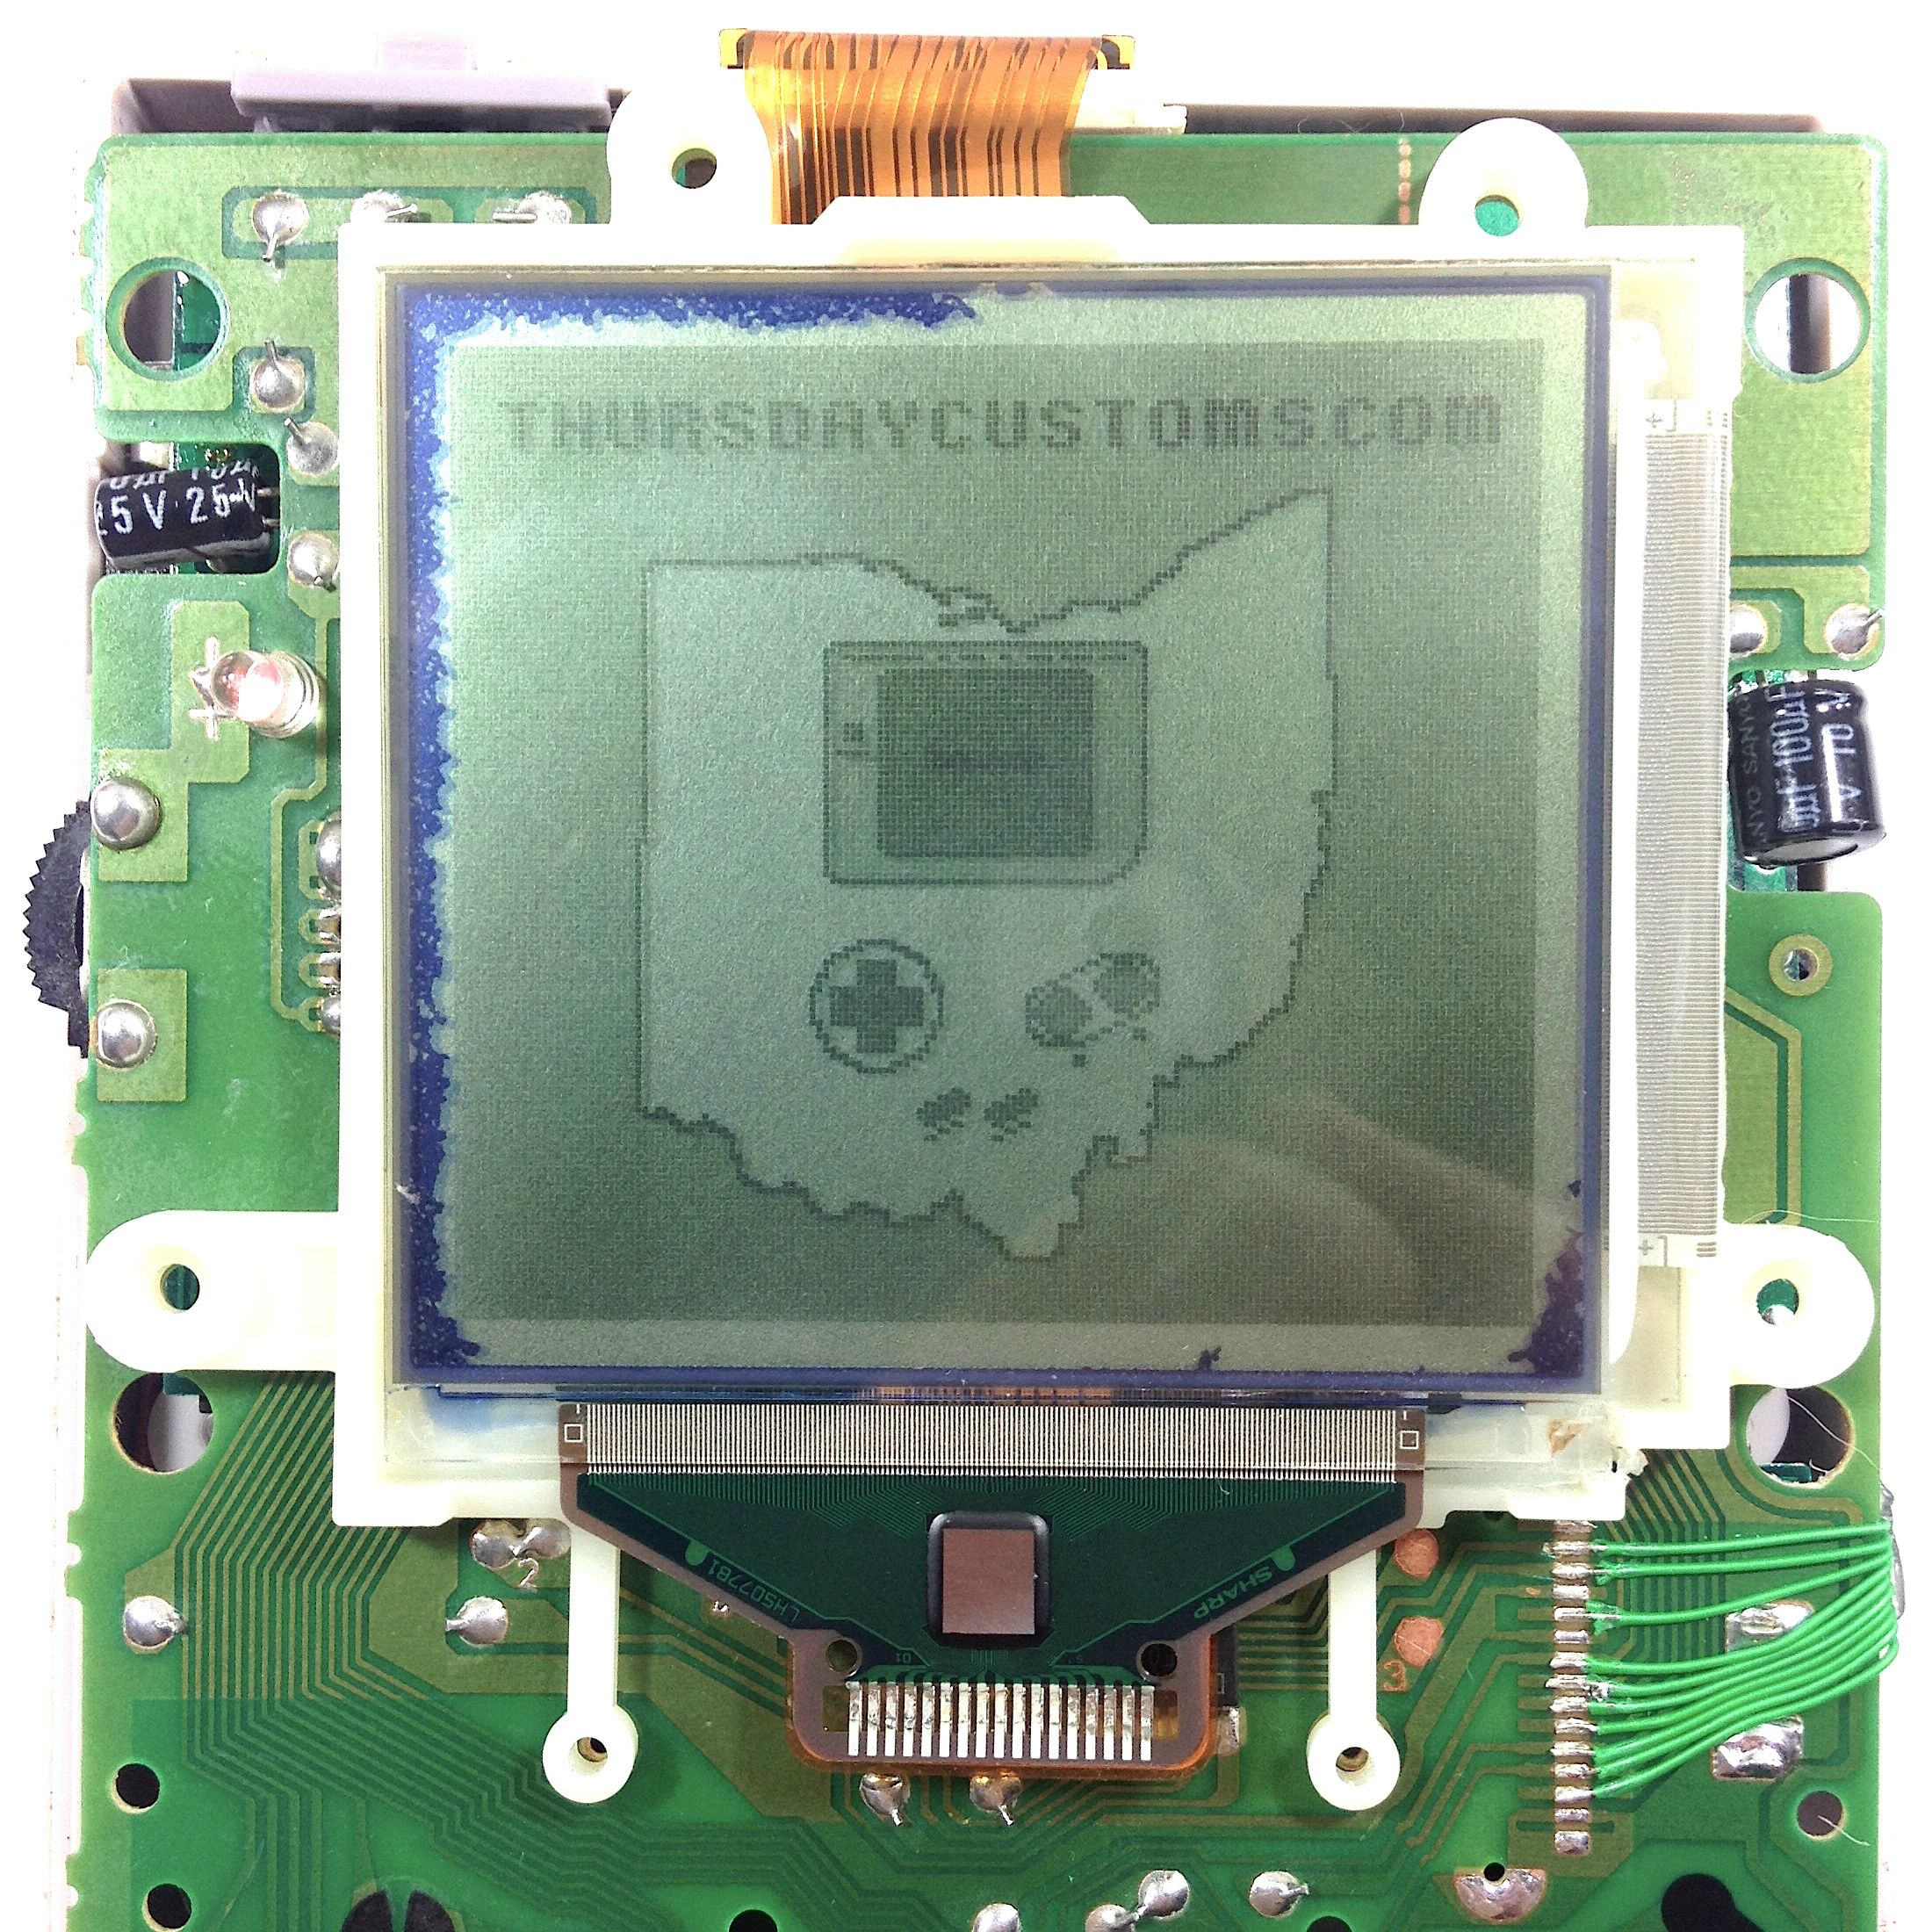 Original gameboy lcd replacement